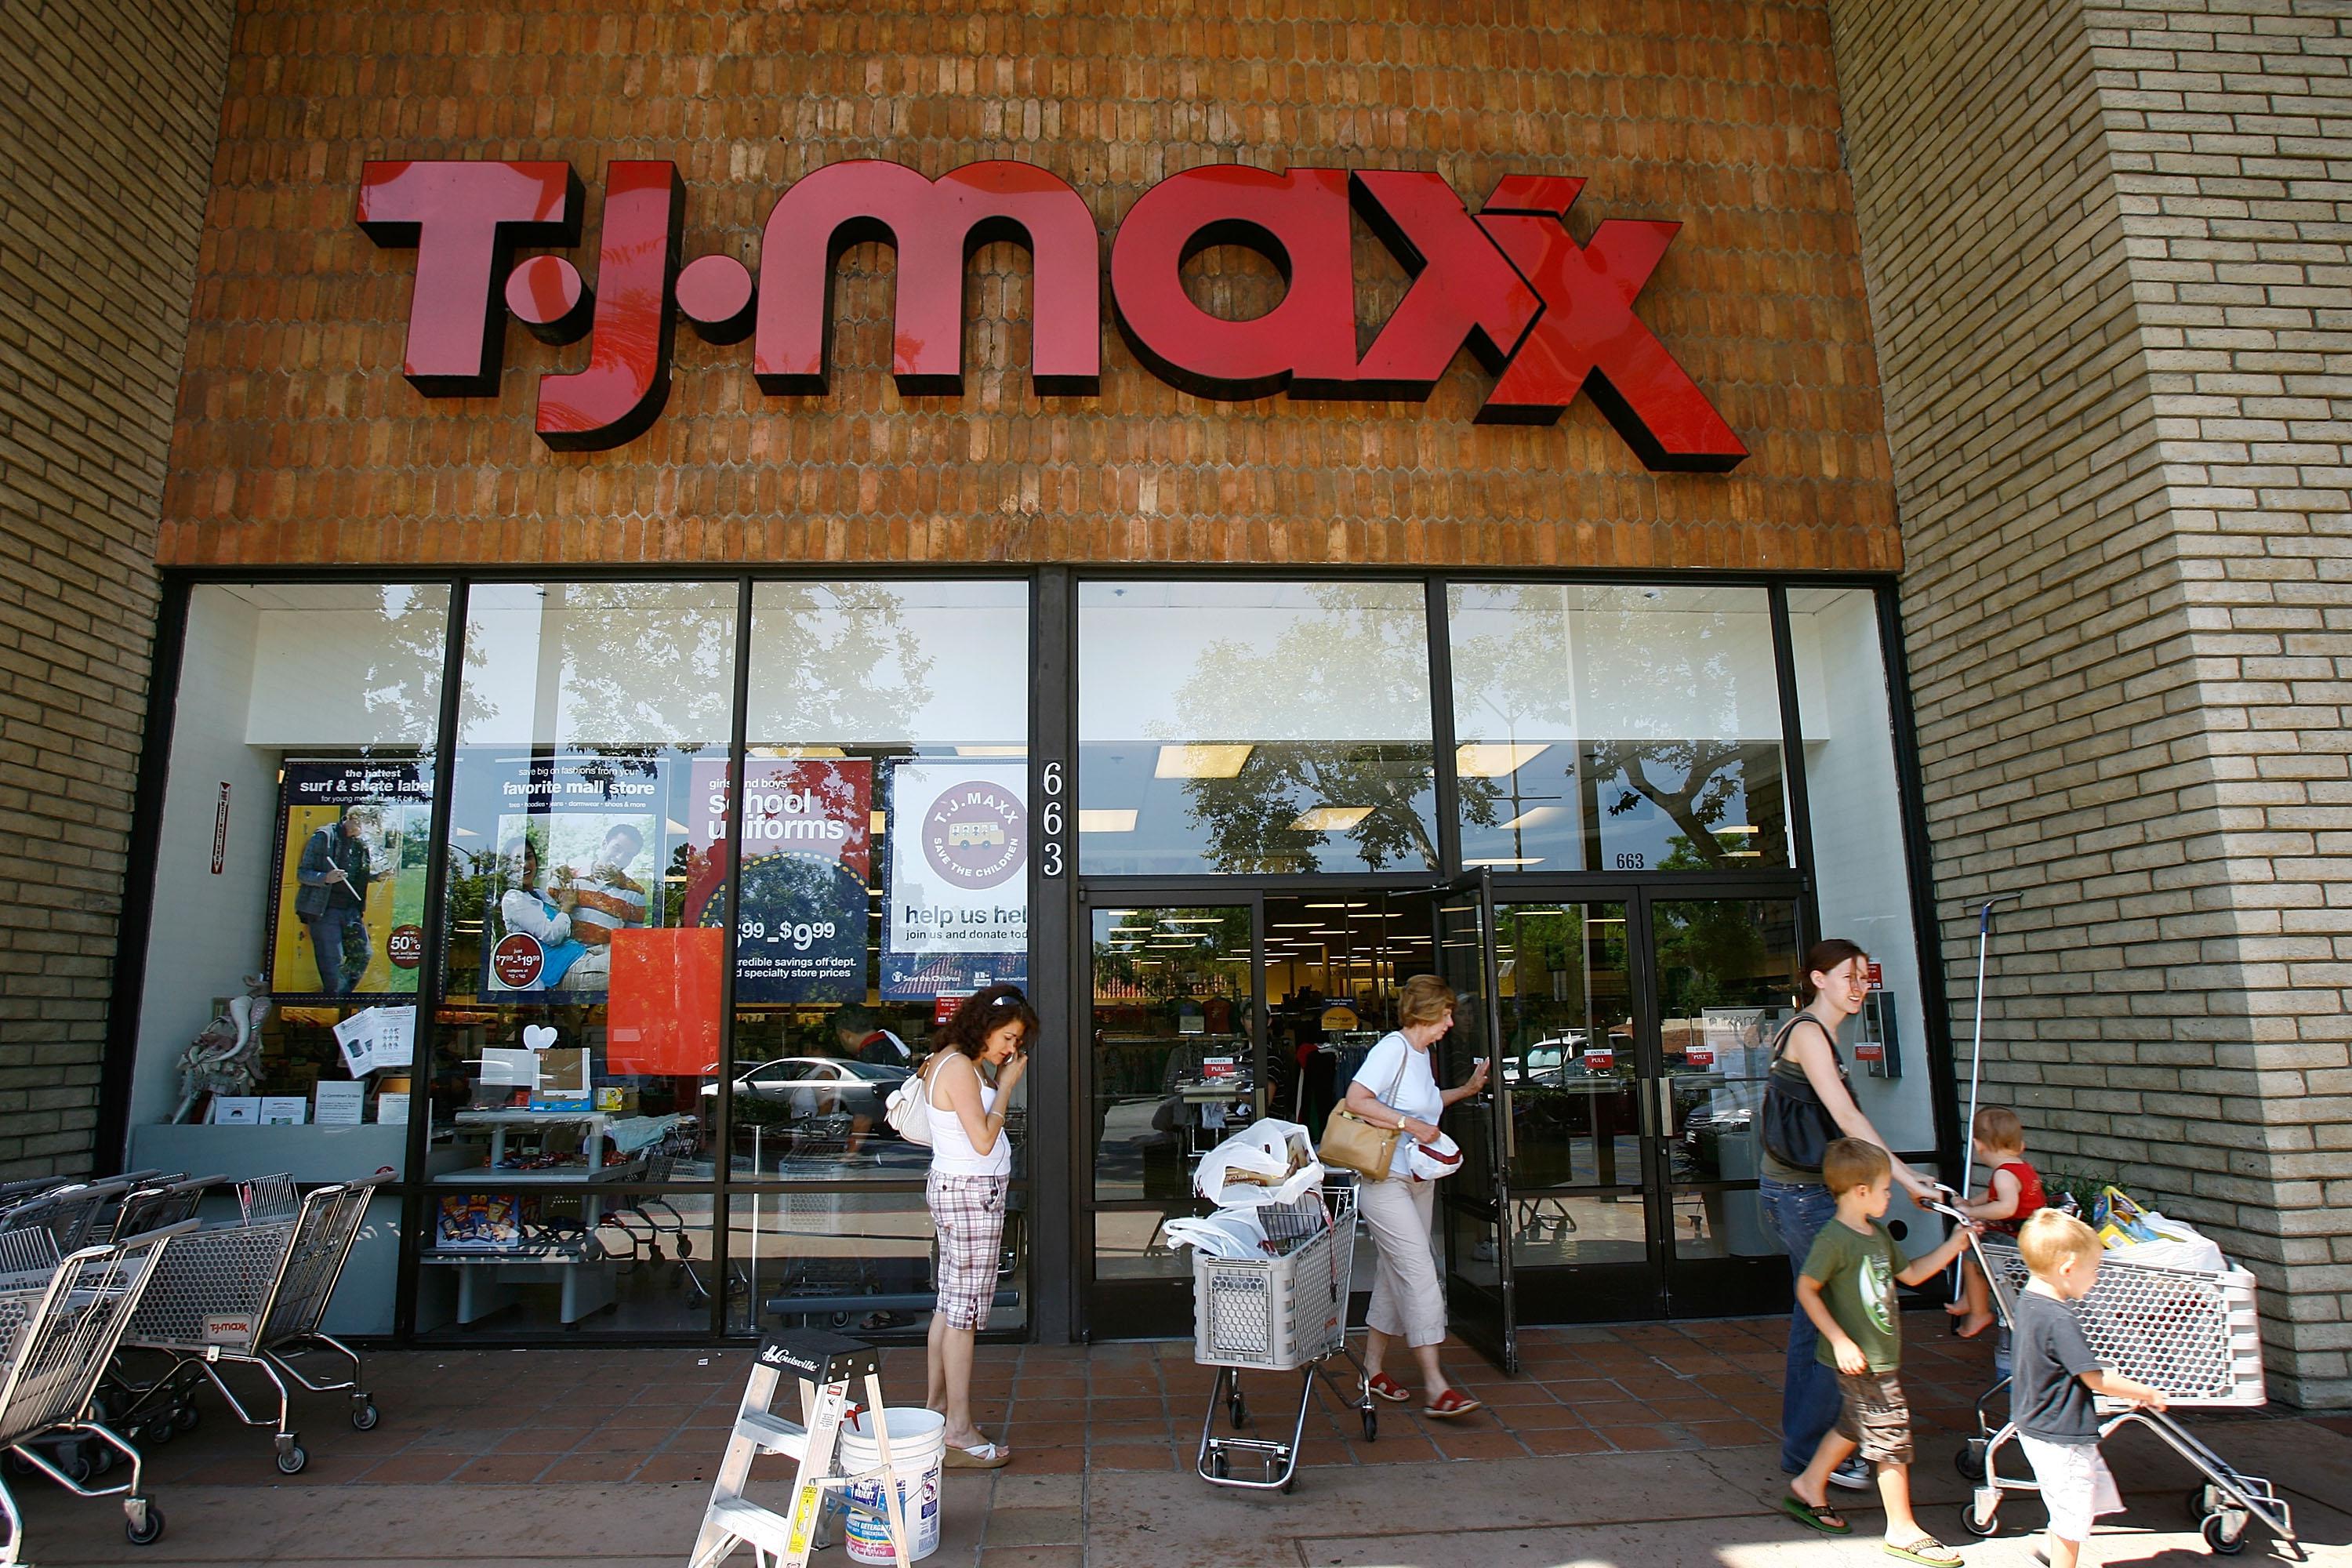 TJ Maxx Online Store: How to Find Deals on Designer Clothing